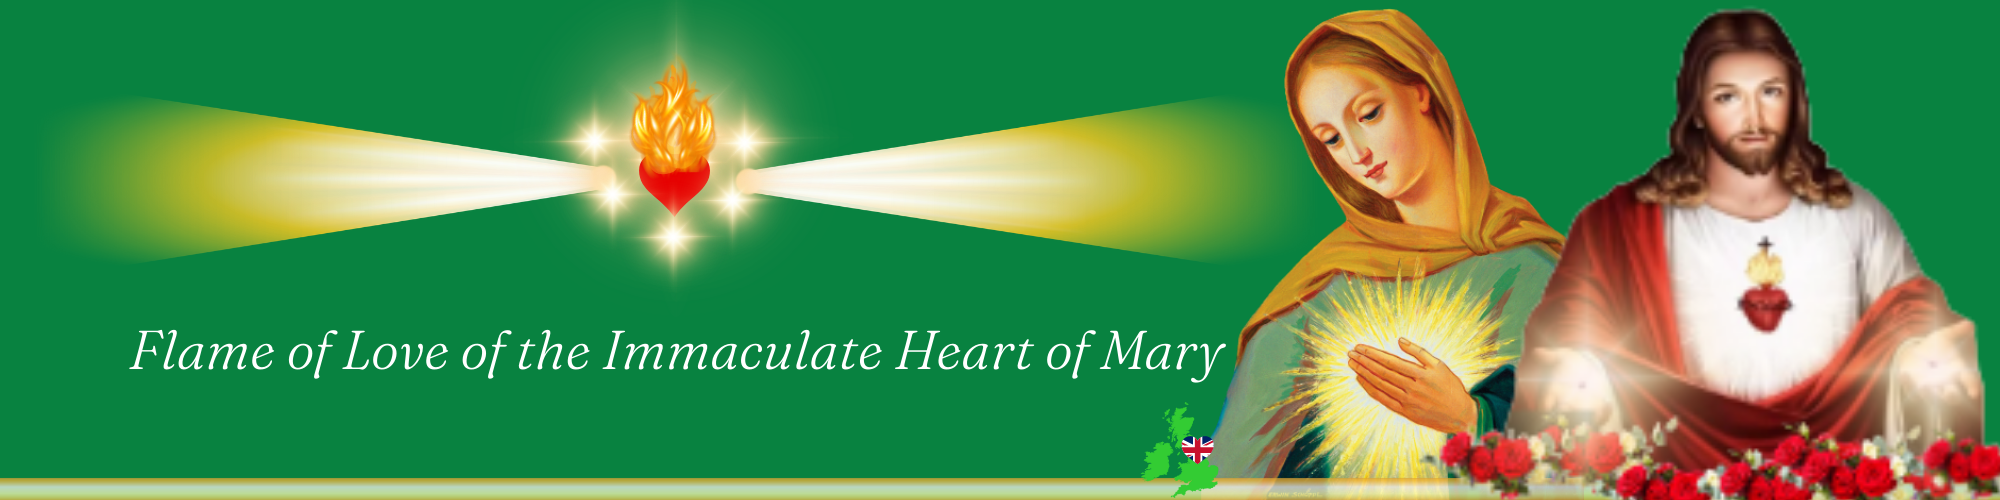 Flame of Love of the Immaculate Heart of Mary UK